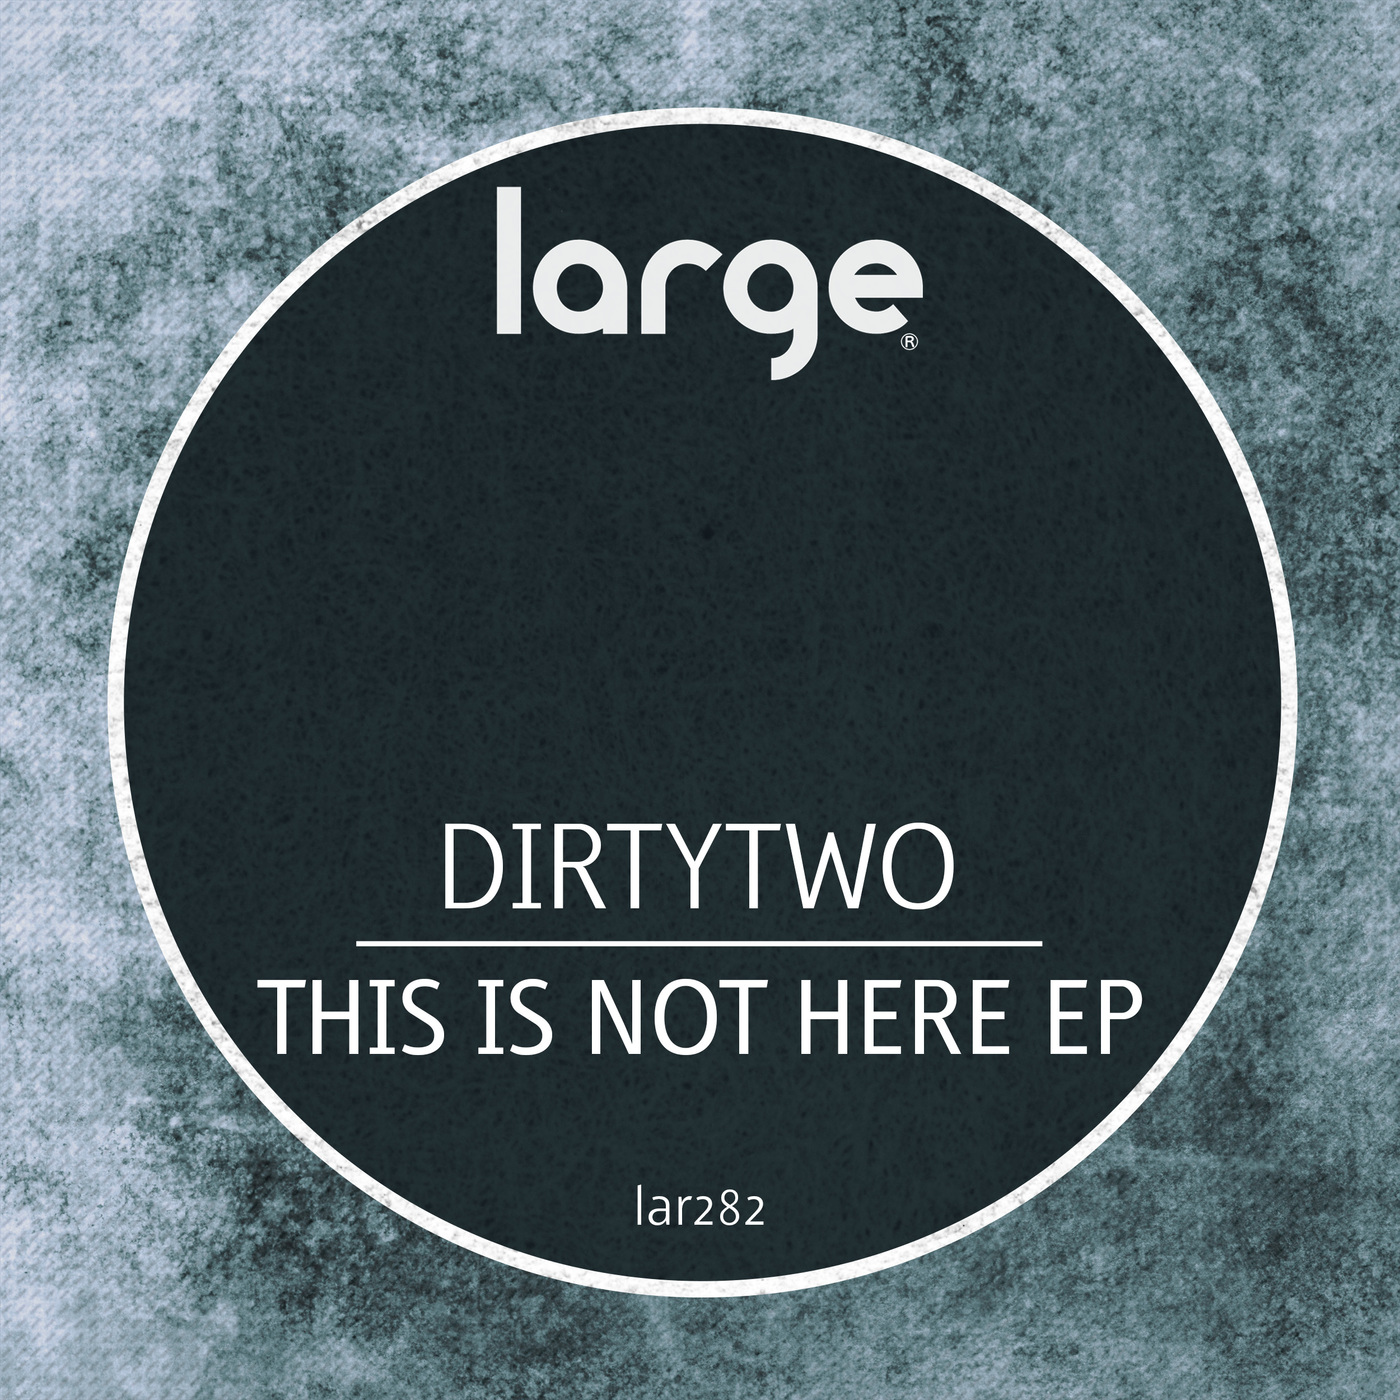 Dirtytwo - This Is Not Here EP / Large Music